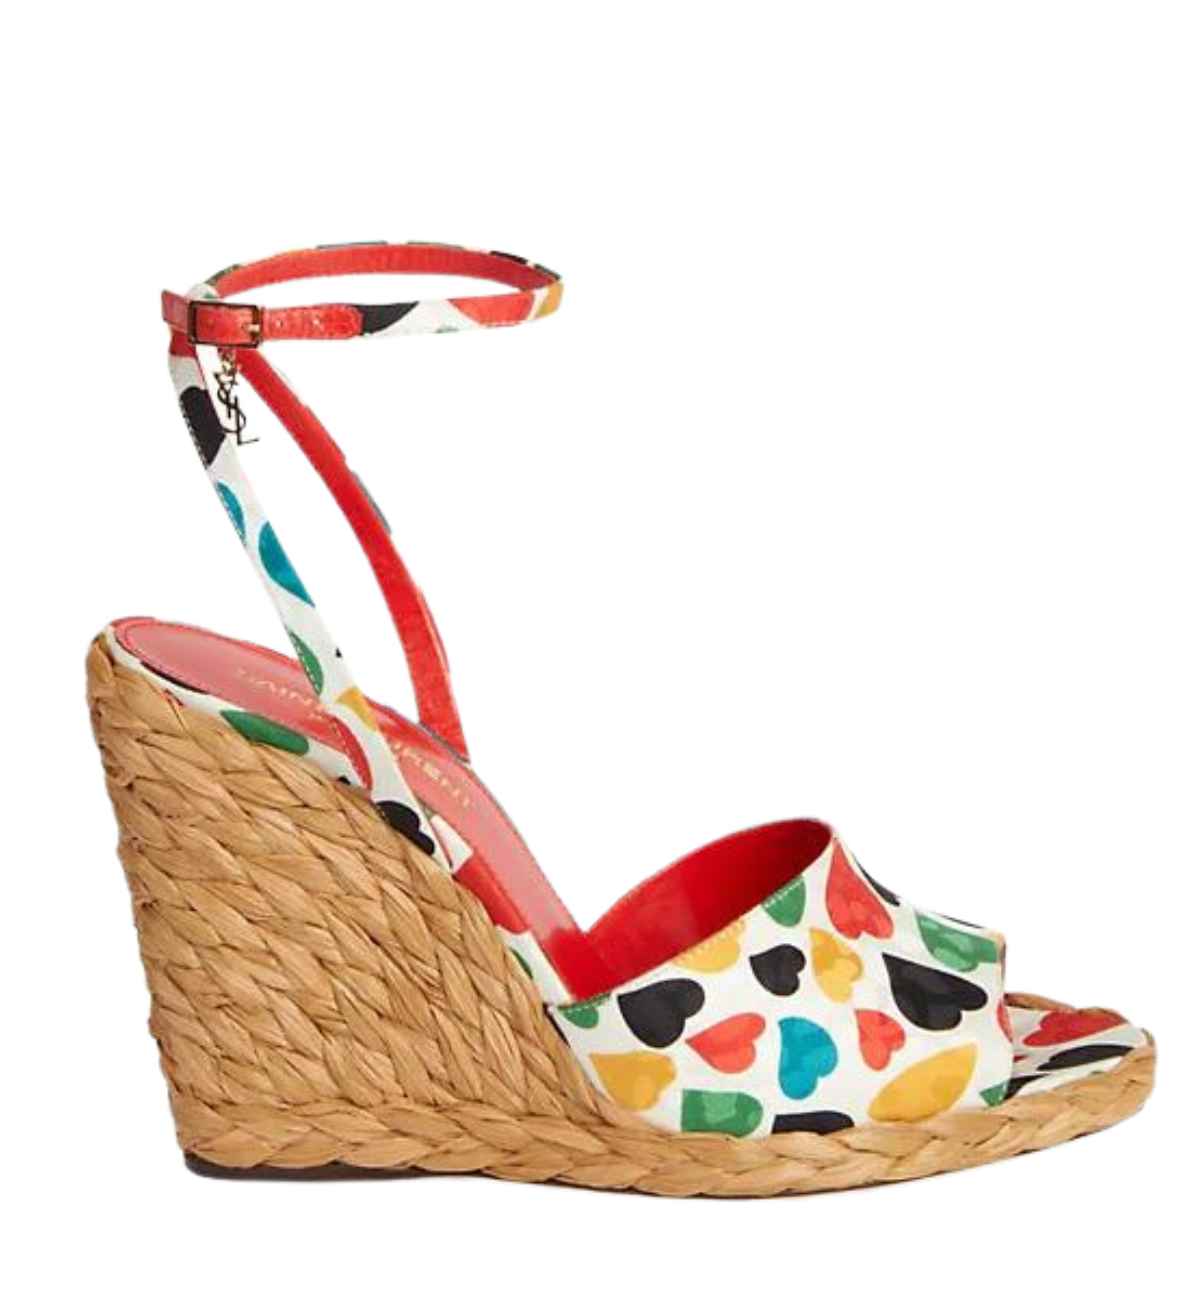 Open toe wedge heart heel with multicoloured heart pattern all over on white background.